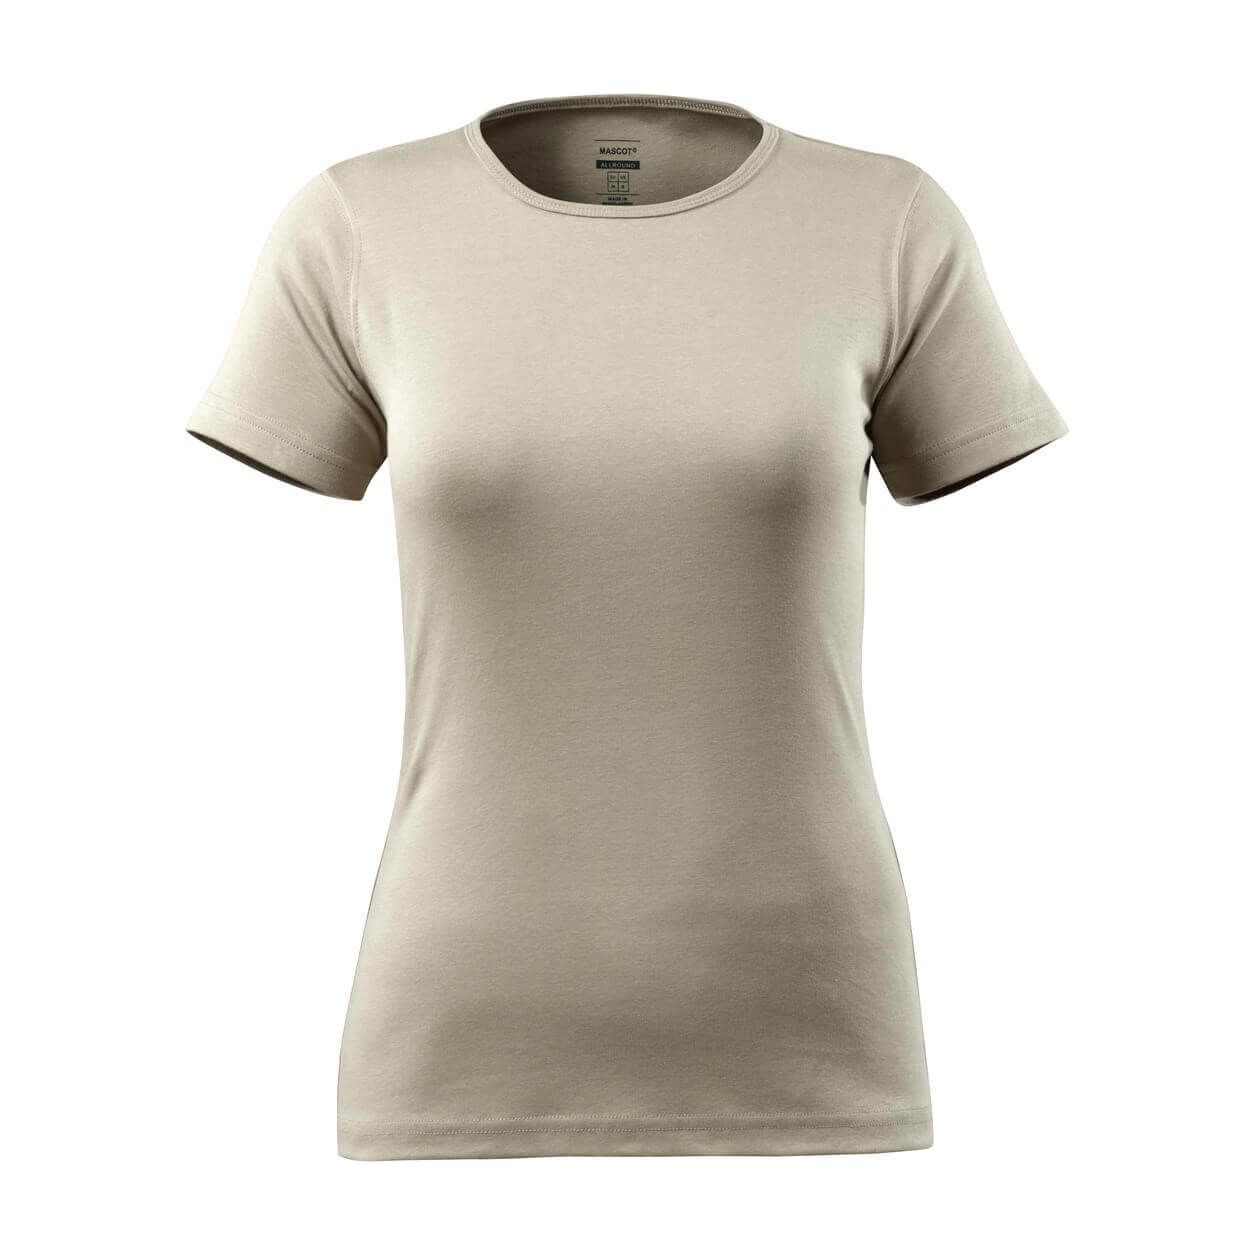 Mascot Arras T-Shirt Round-Neck 51583-967 - Crossover, Womens - (Colours 1 of 2)